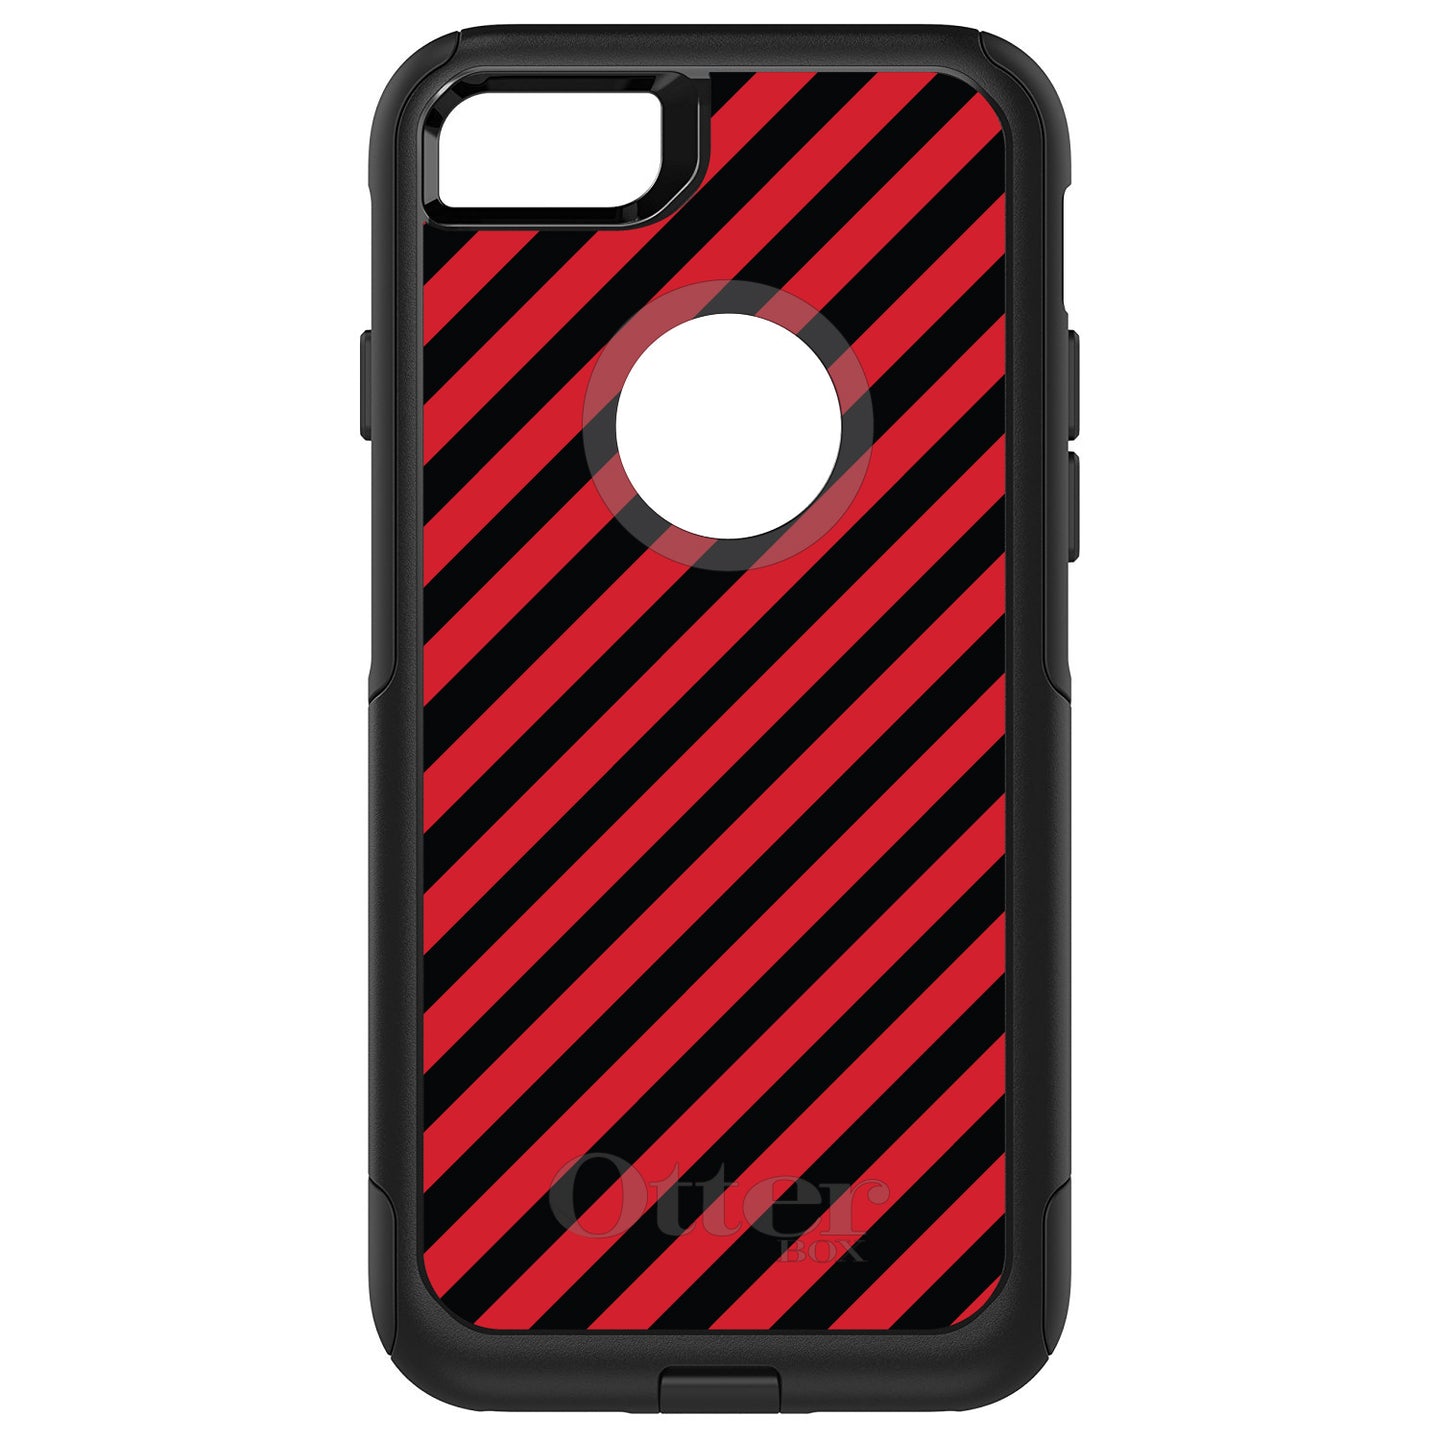 DistinctInk™ OtterBox Commuter Series Case for Apple iPhone or Samsung Galaxy - Black Red Diagonal Stripes